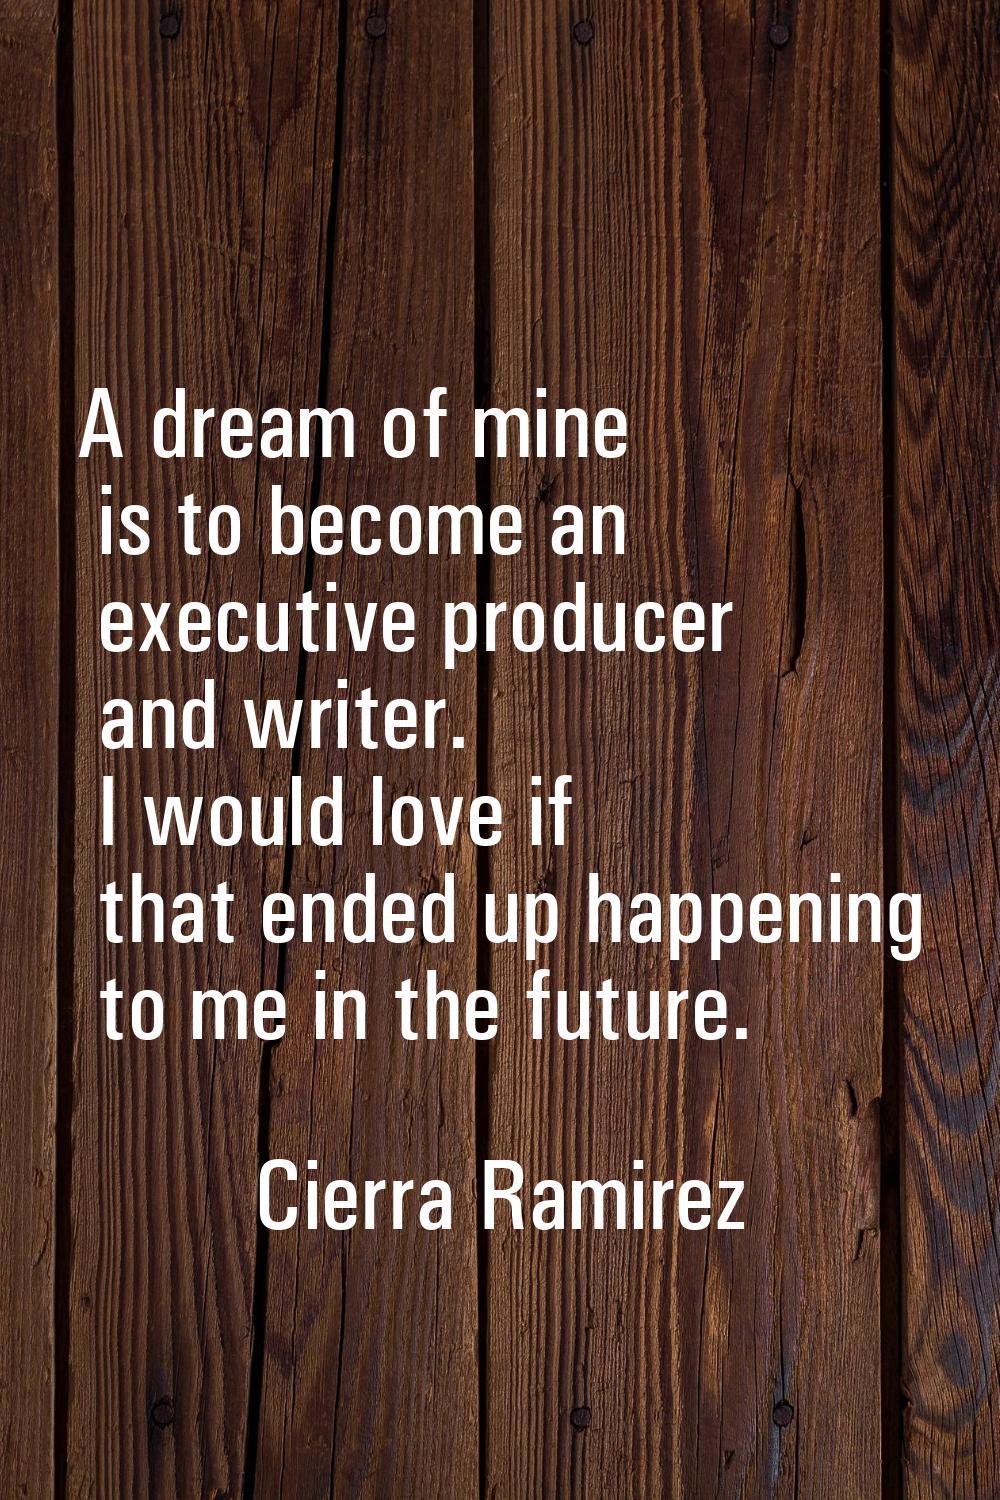 A dream of mine is to become an executive producer and writer. I would love if that ended up happen